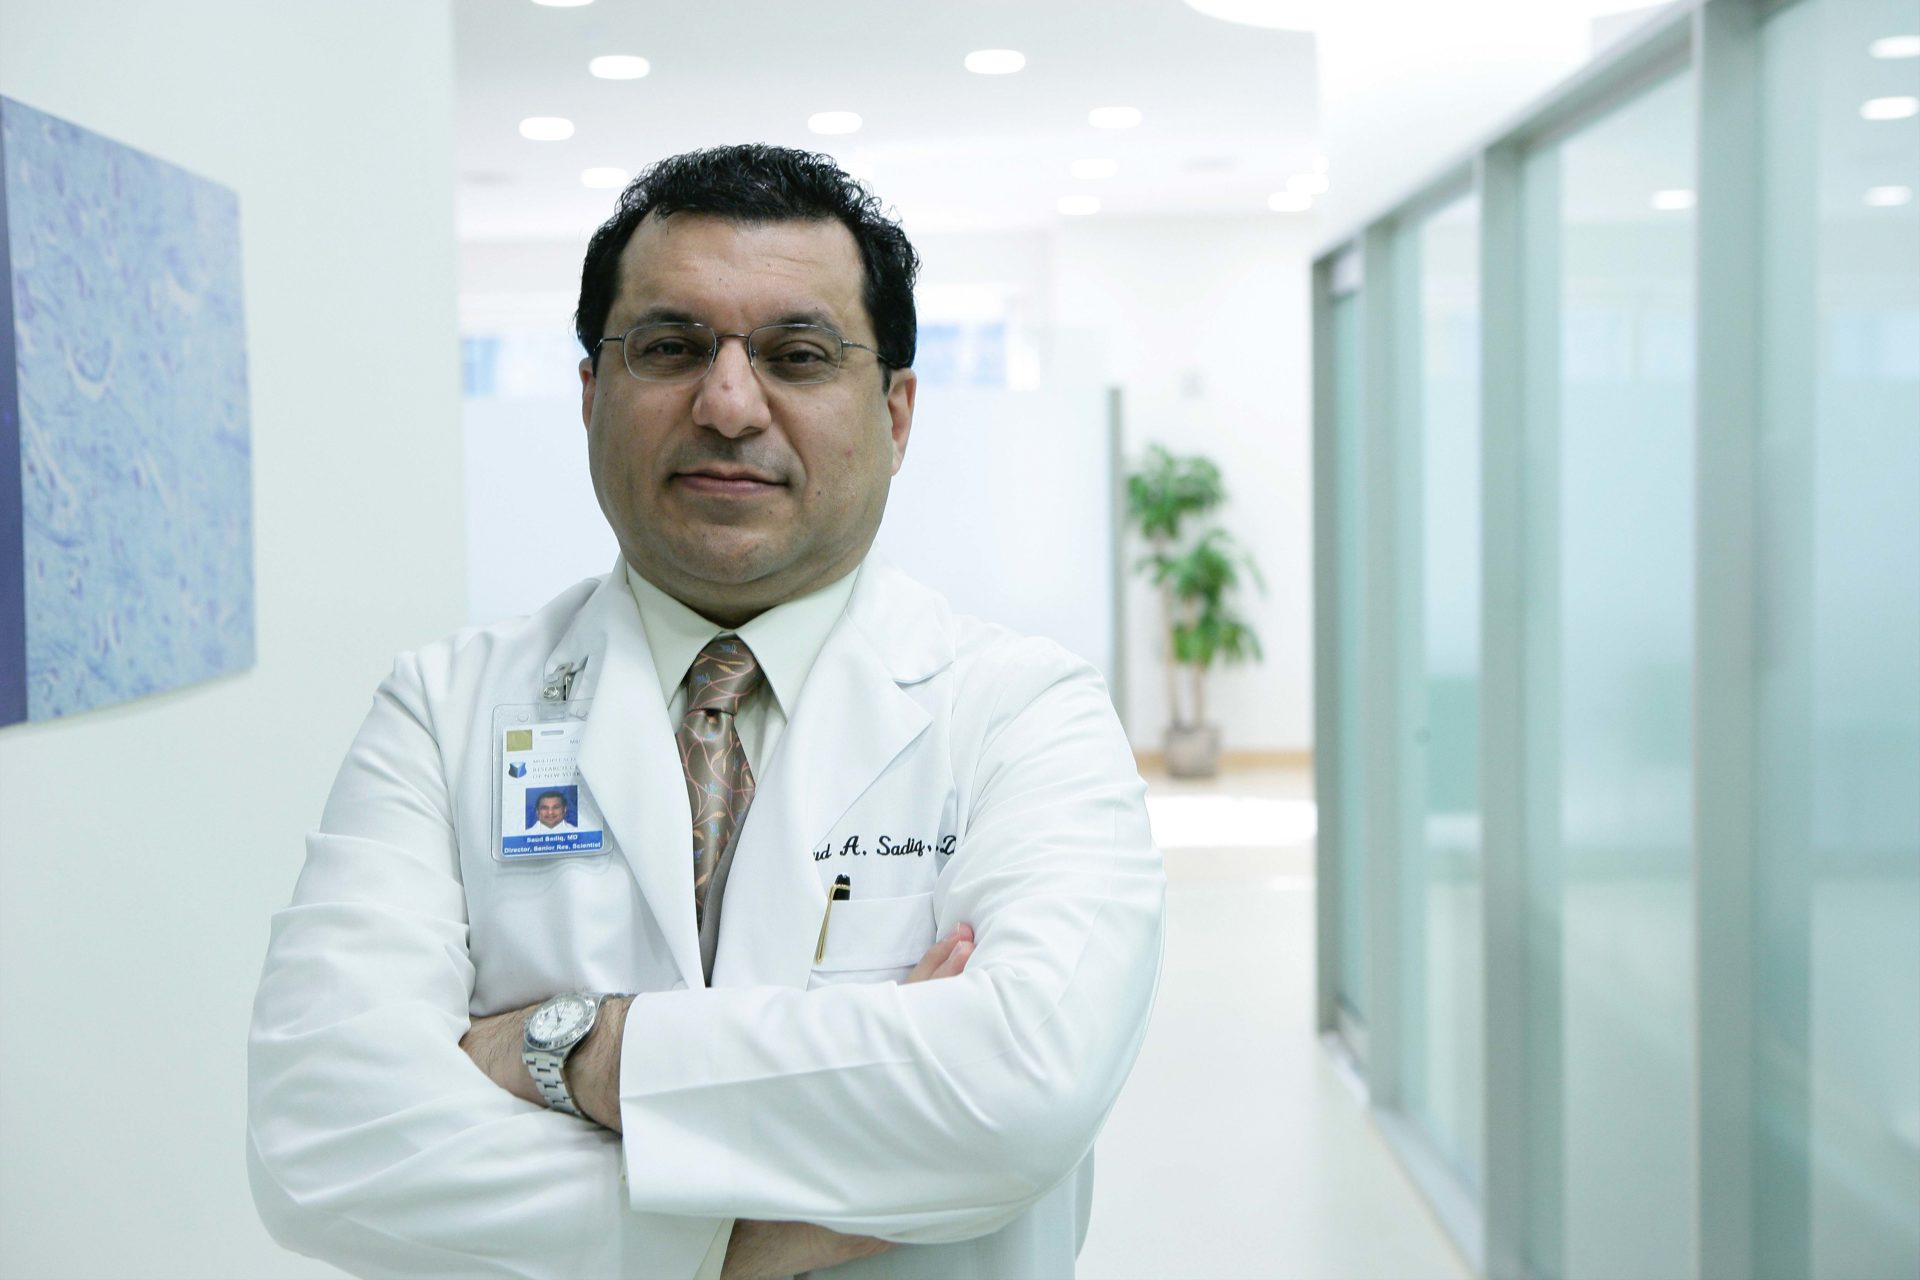 Dr. Sadiq is Leading the Trial Investigating Stem Cells for MS